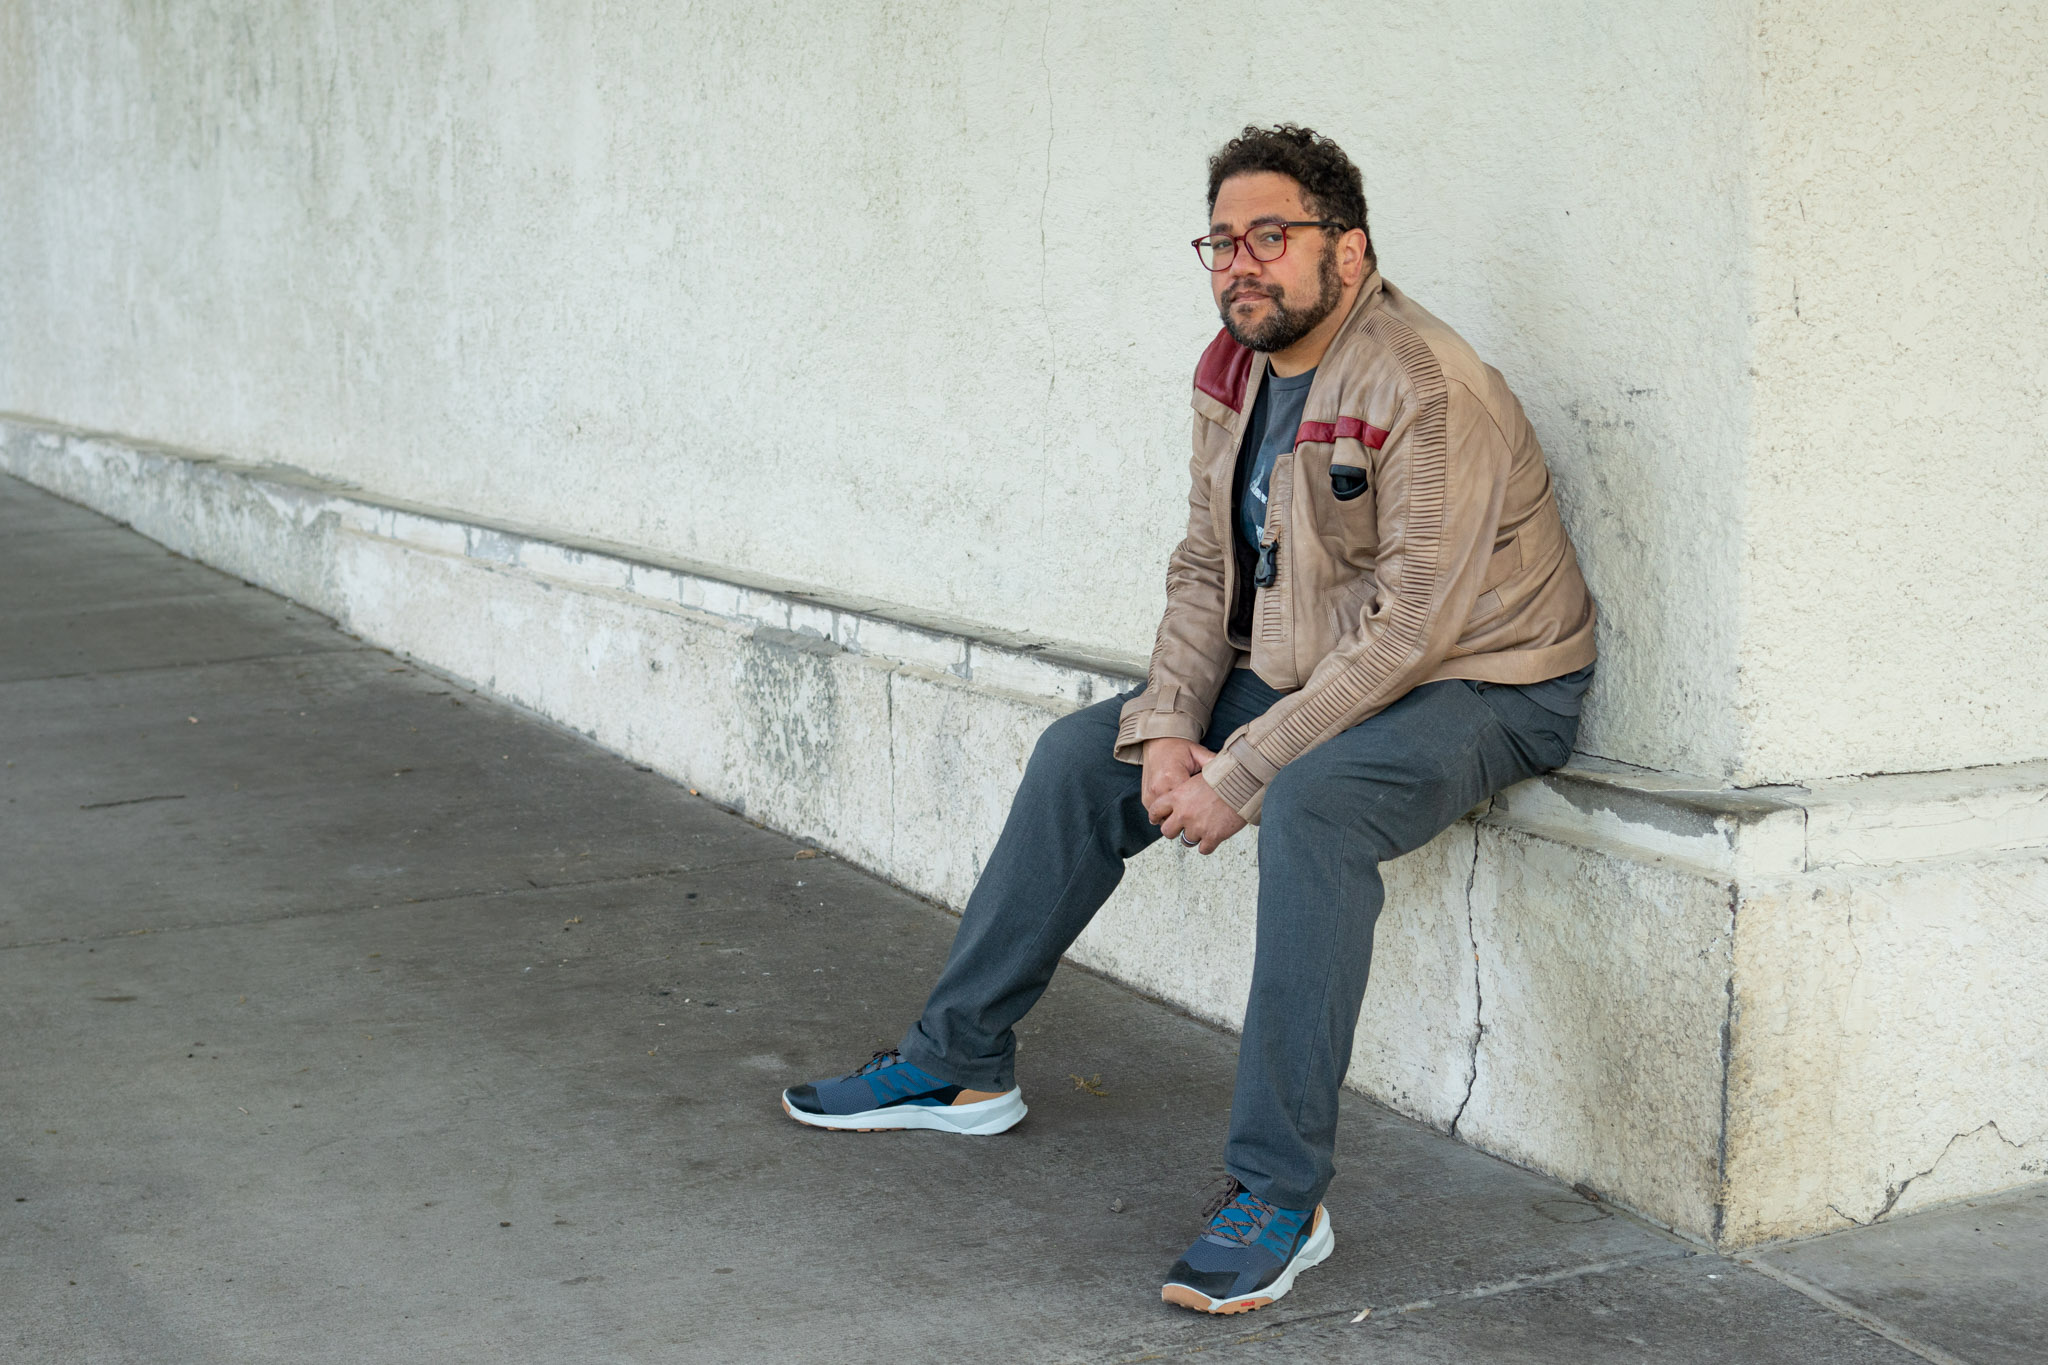 Photo of creator Duck Washington sitting on a curb with a large balnk building behind him.